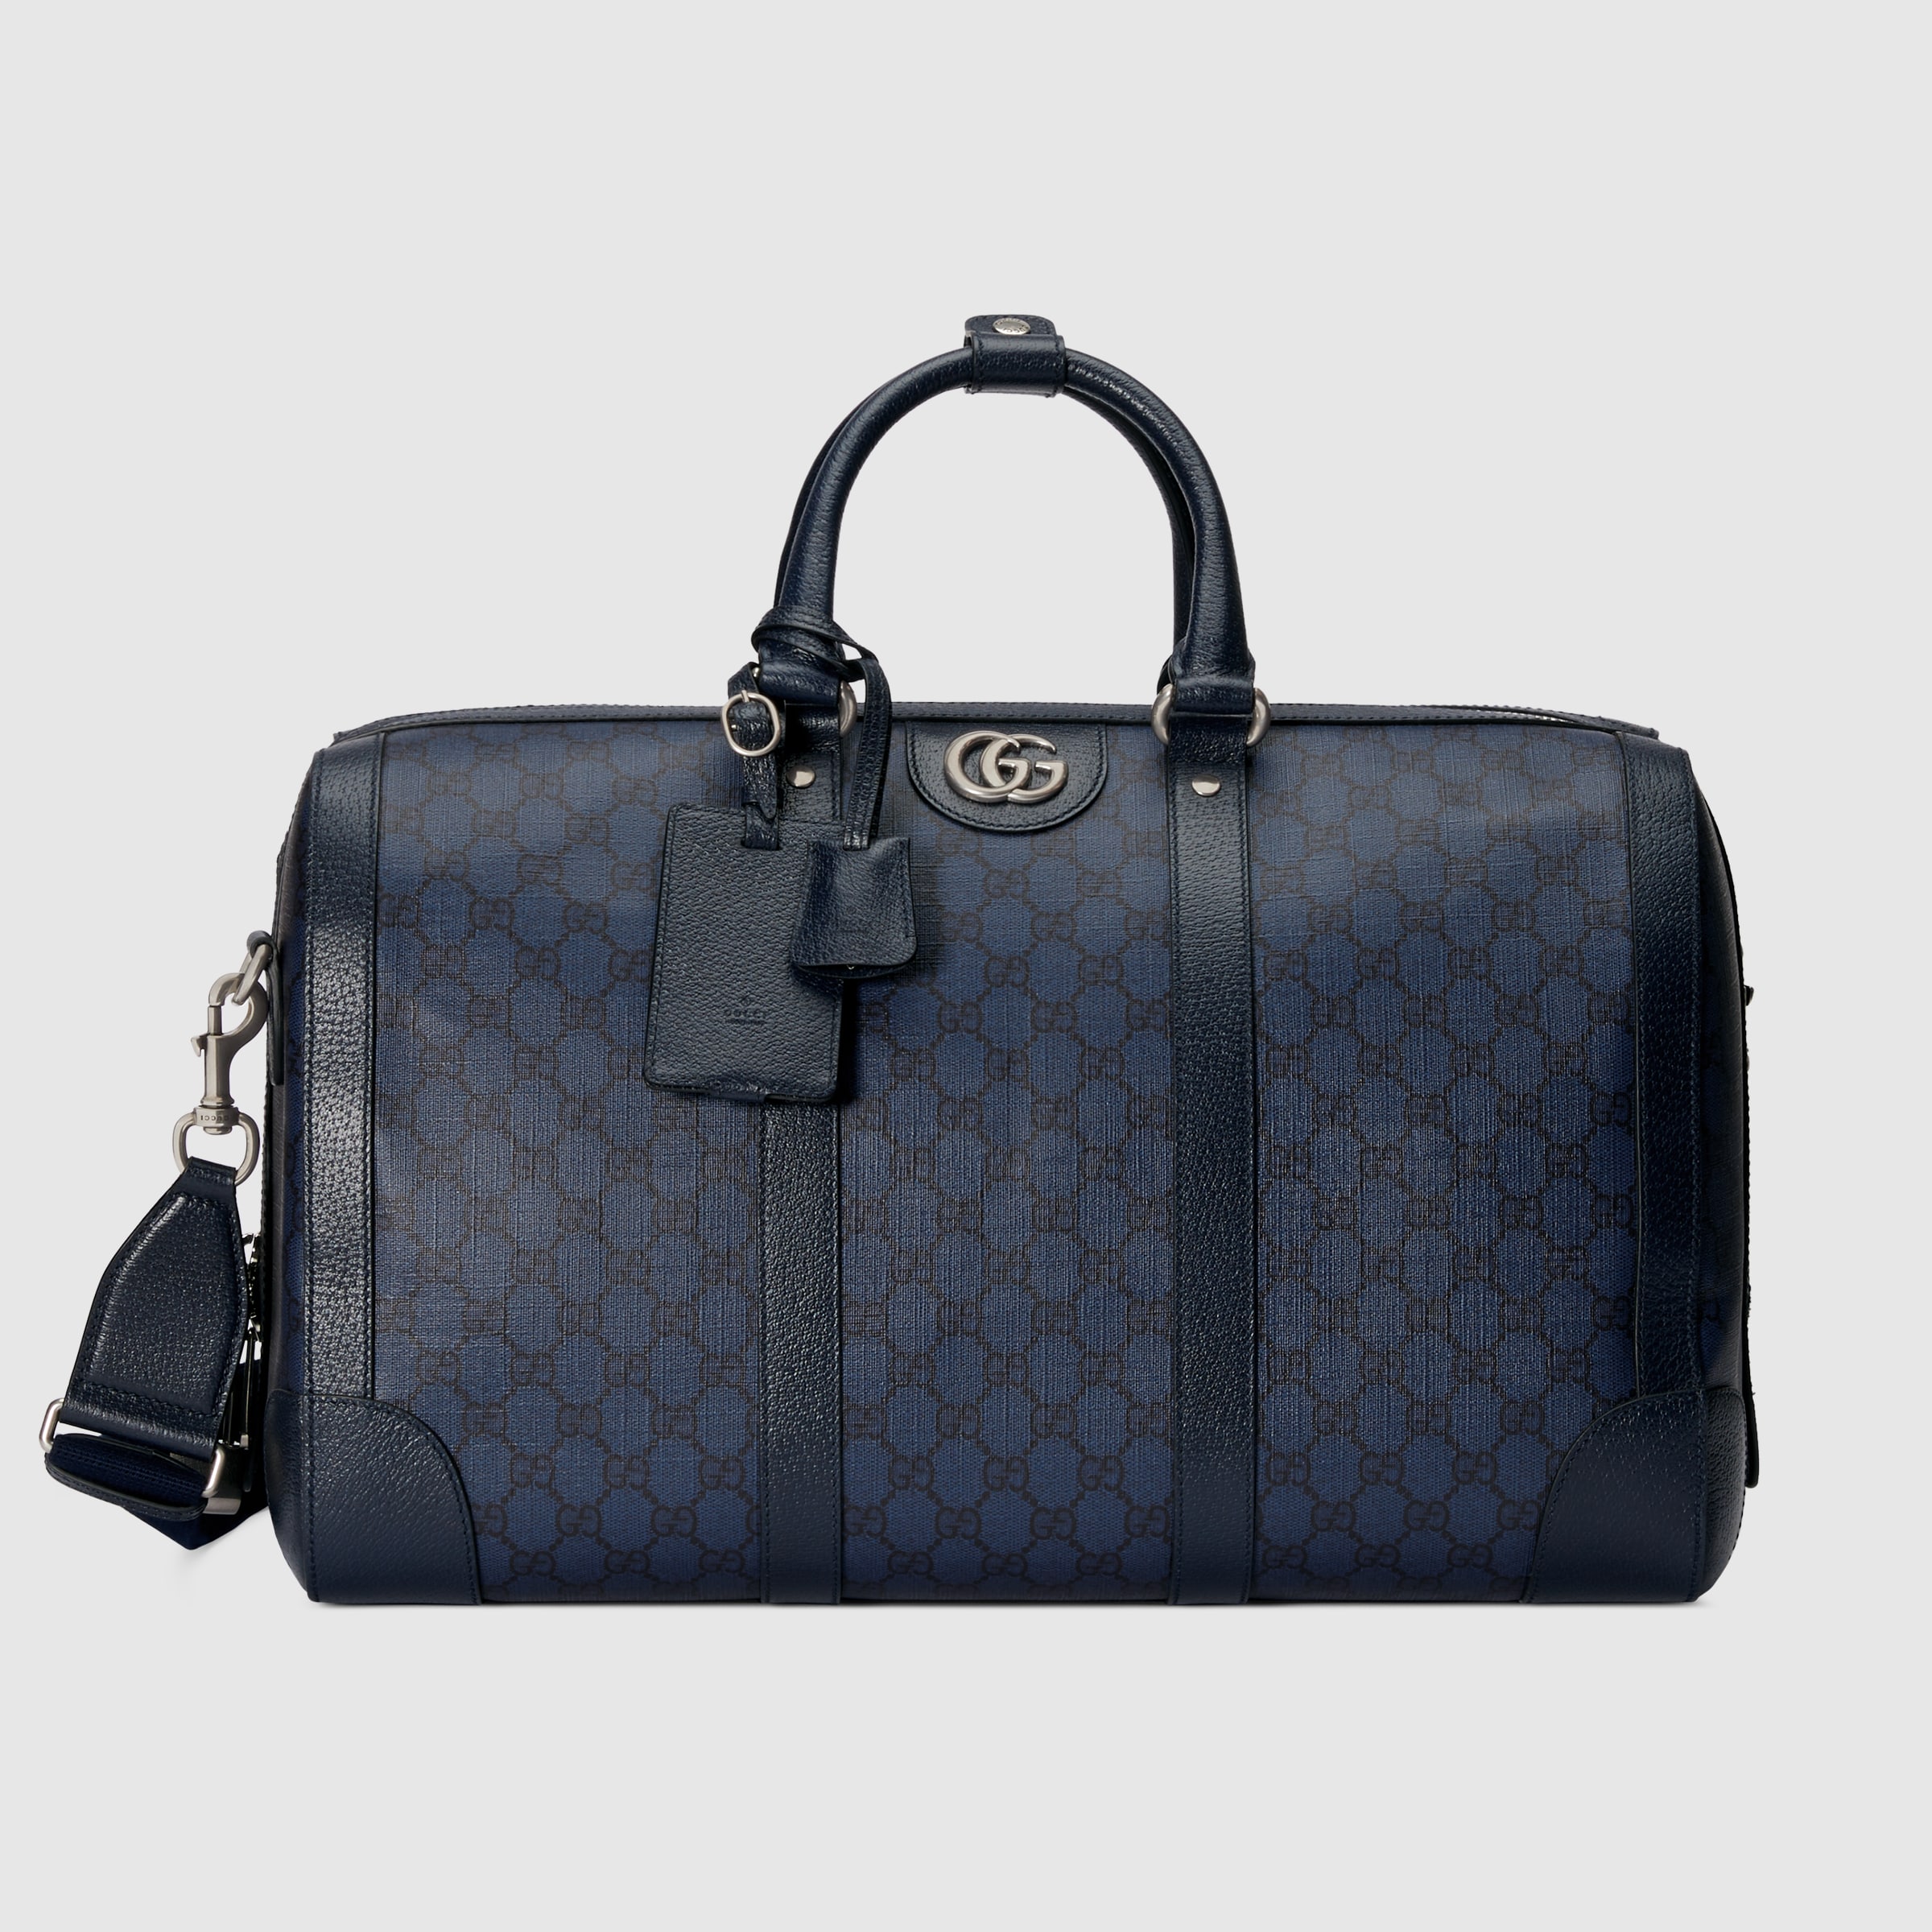 Ophidia small gucci duffle bag